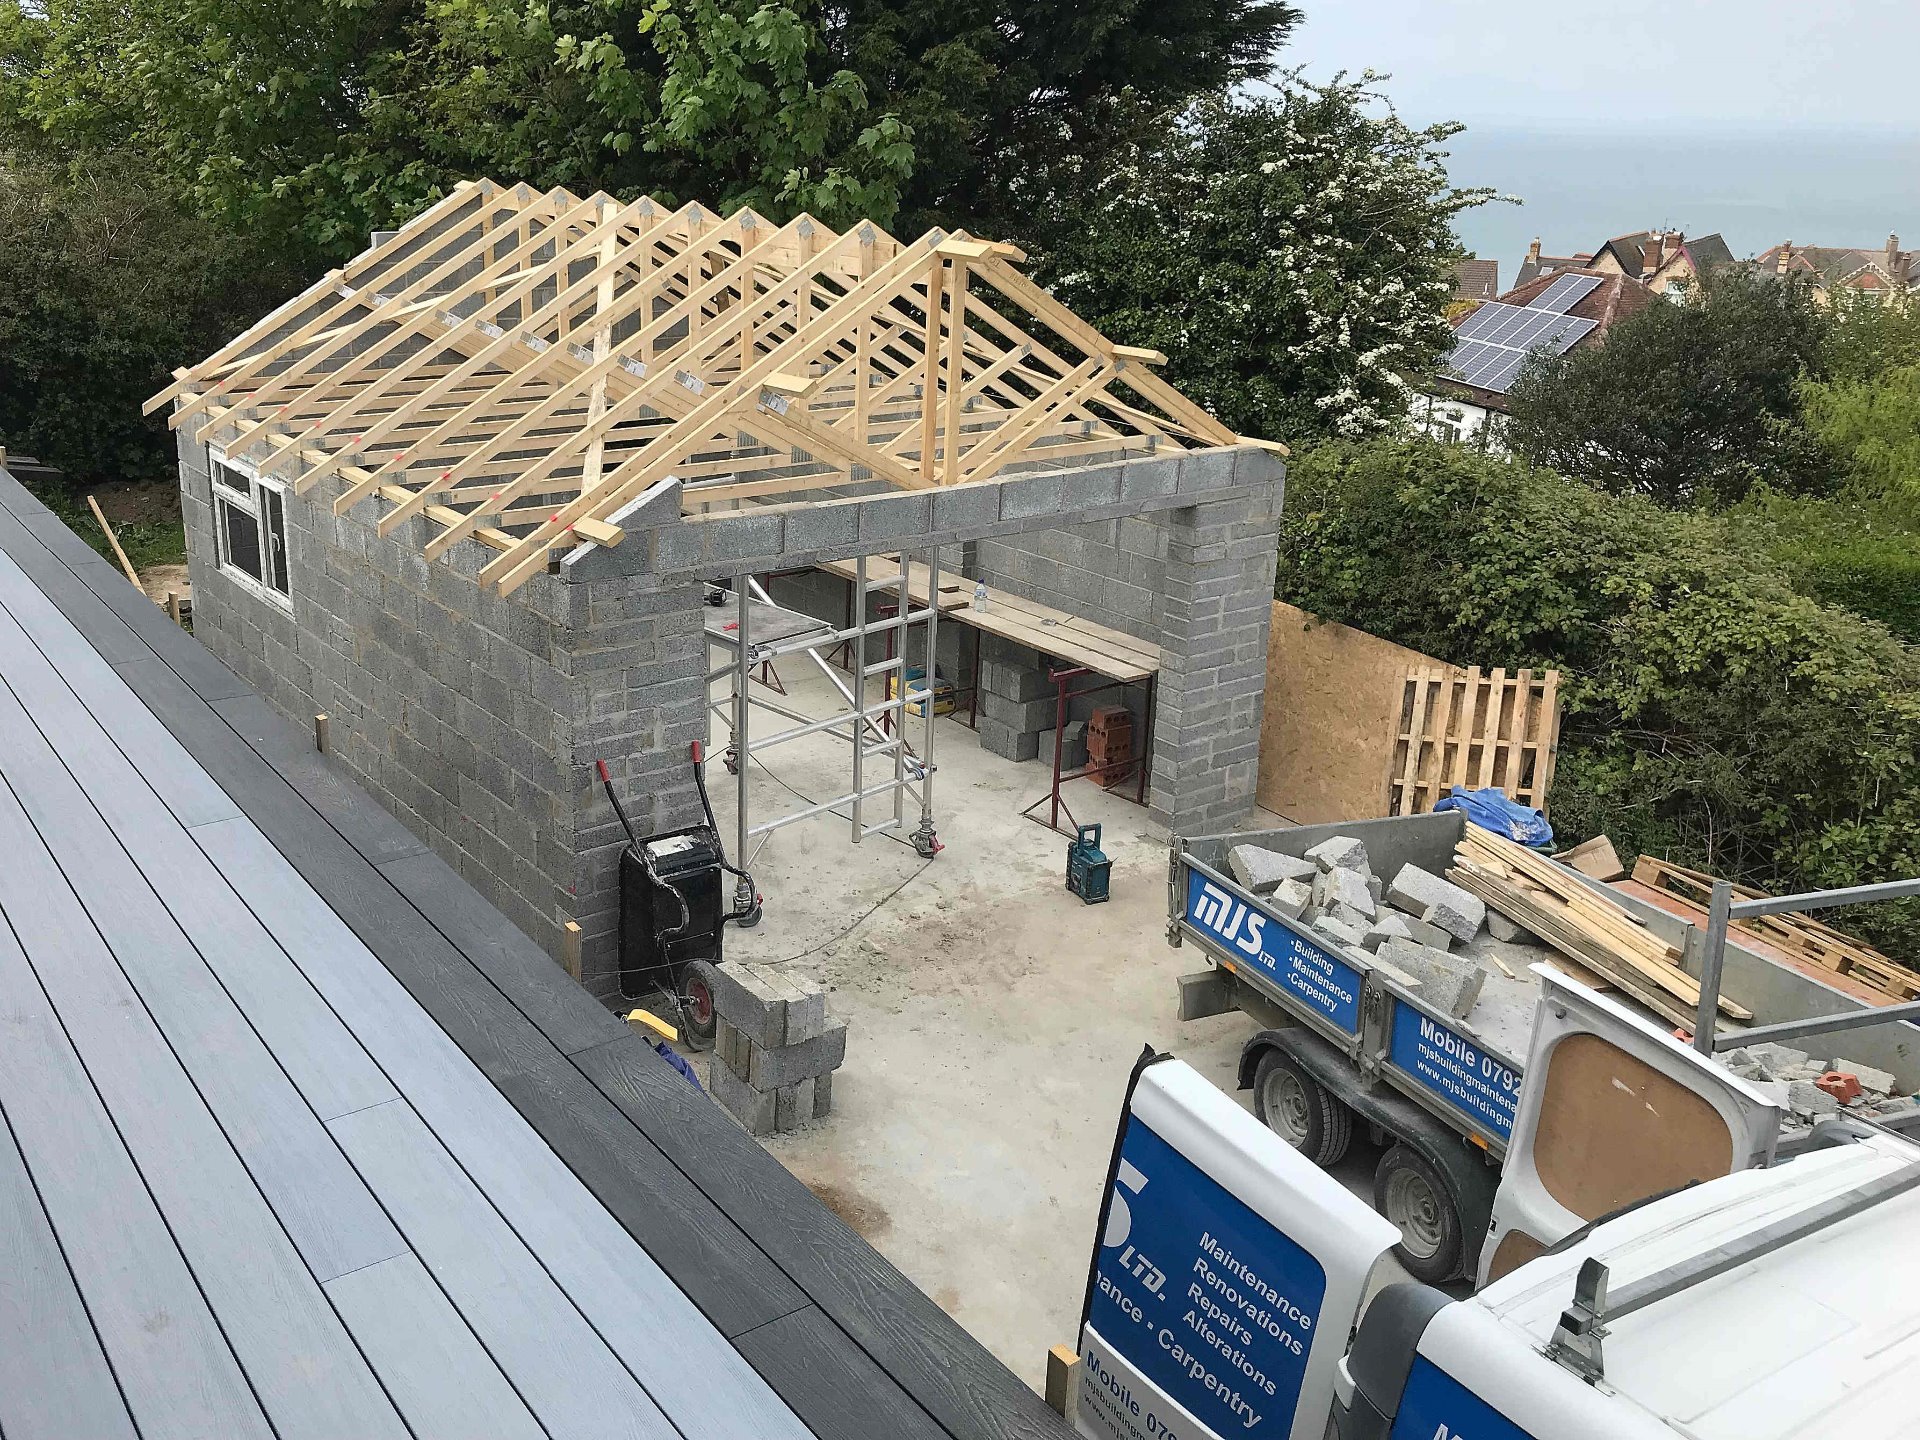 Detached large garage with slated pitched roof in North Devon